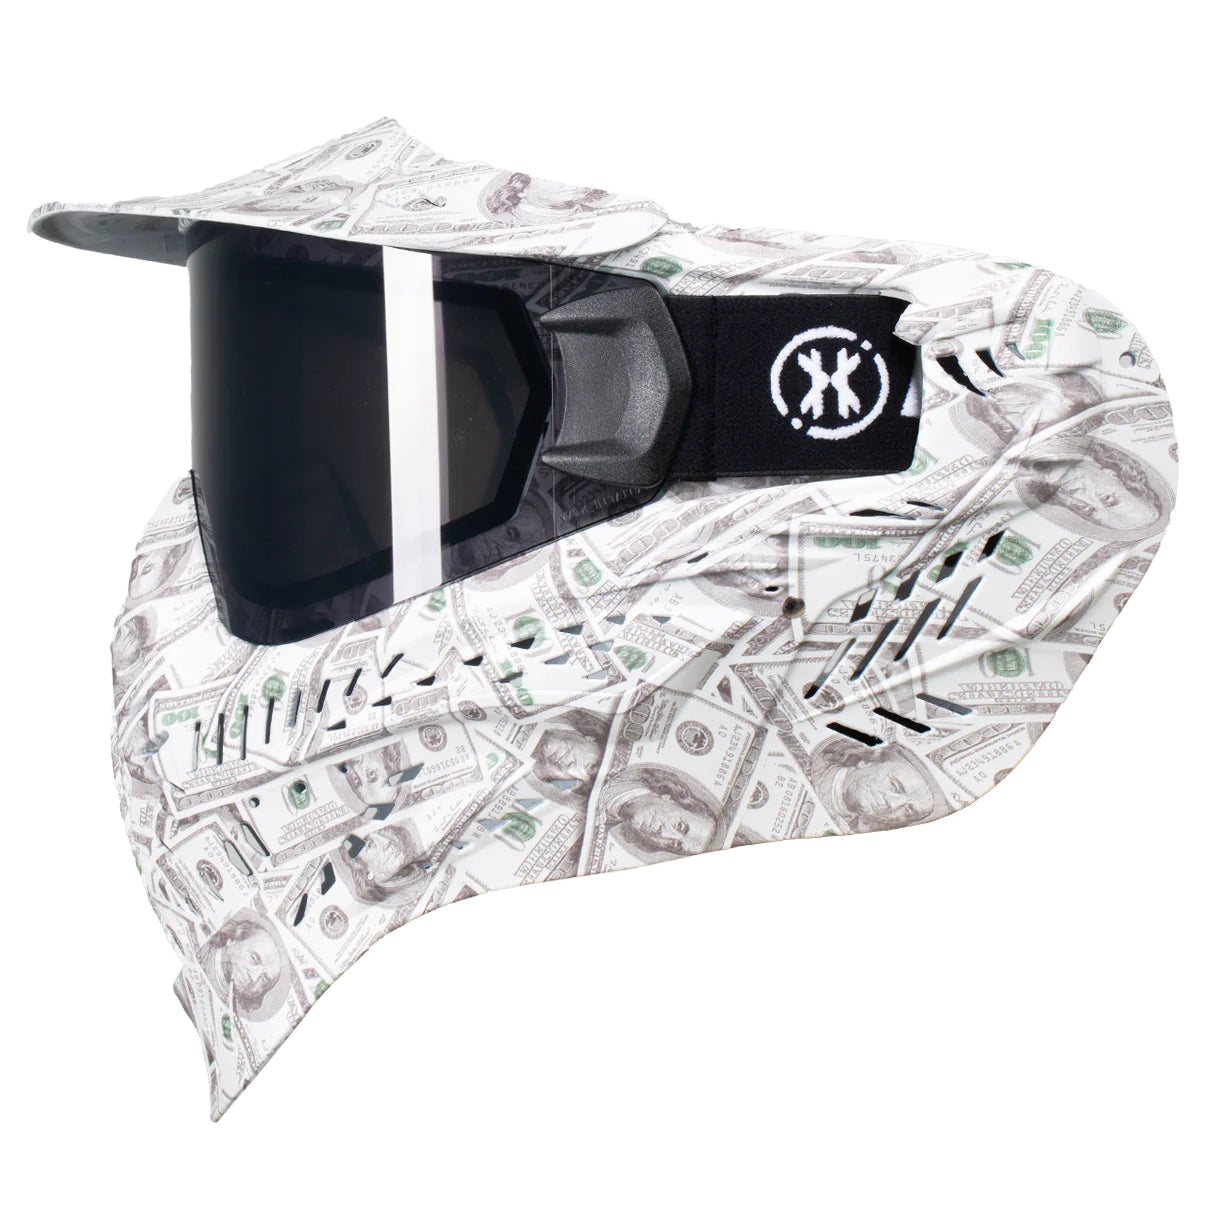 HSTL Goggle | Money | Paintball & Airsoft Goggle